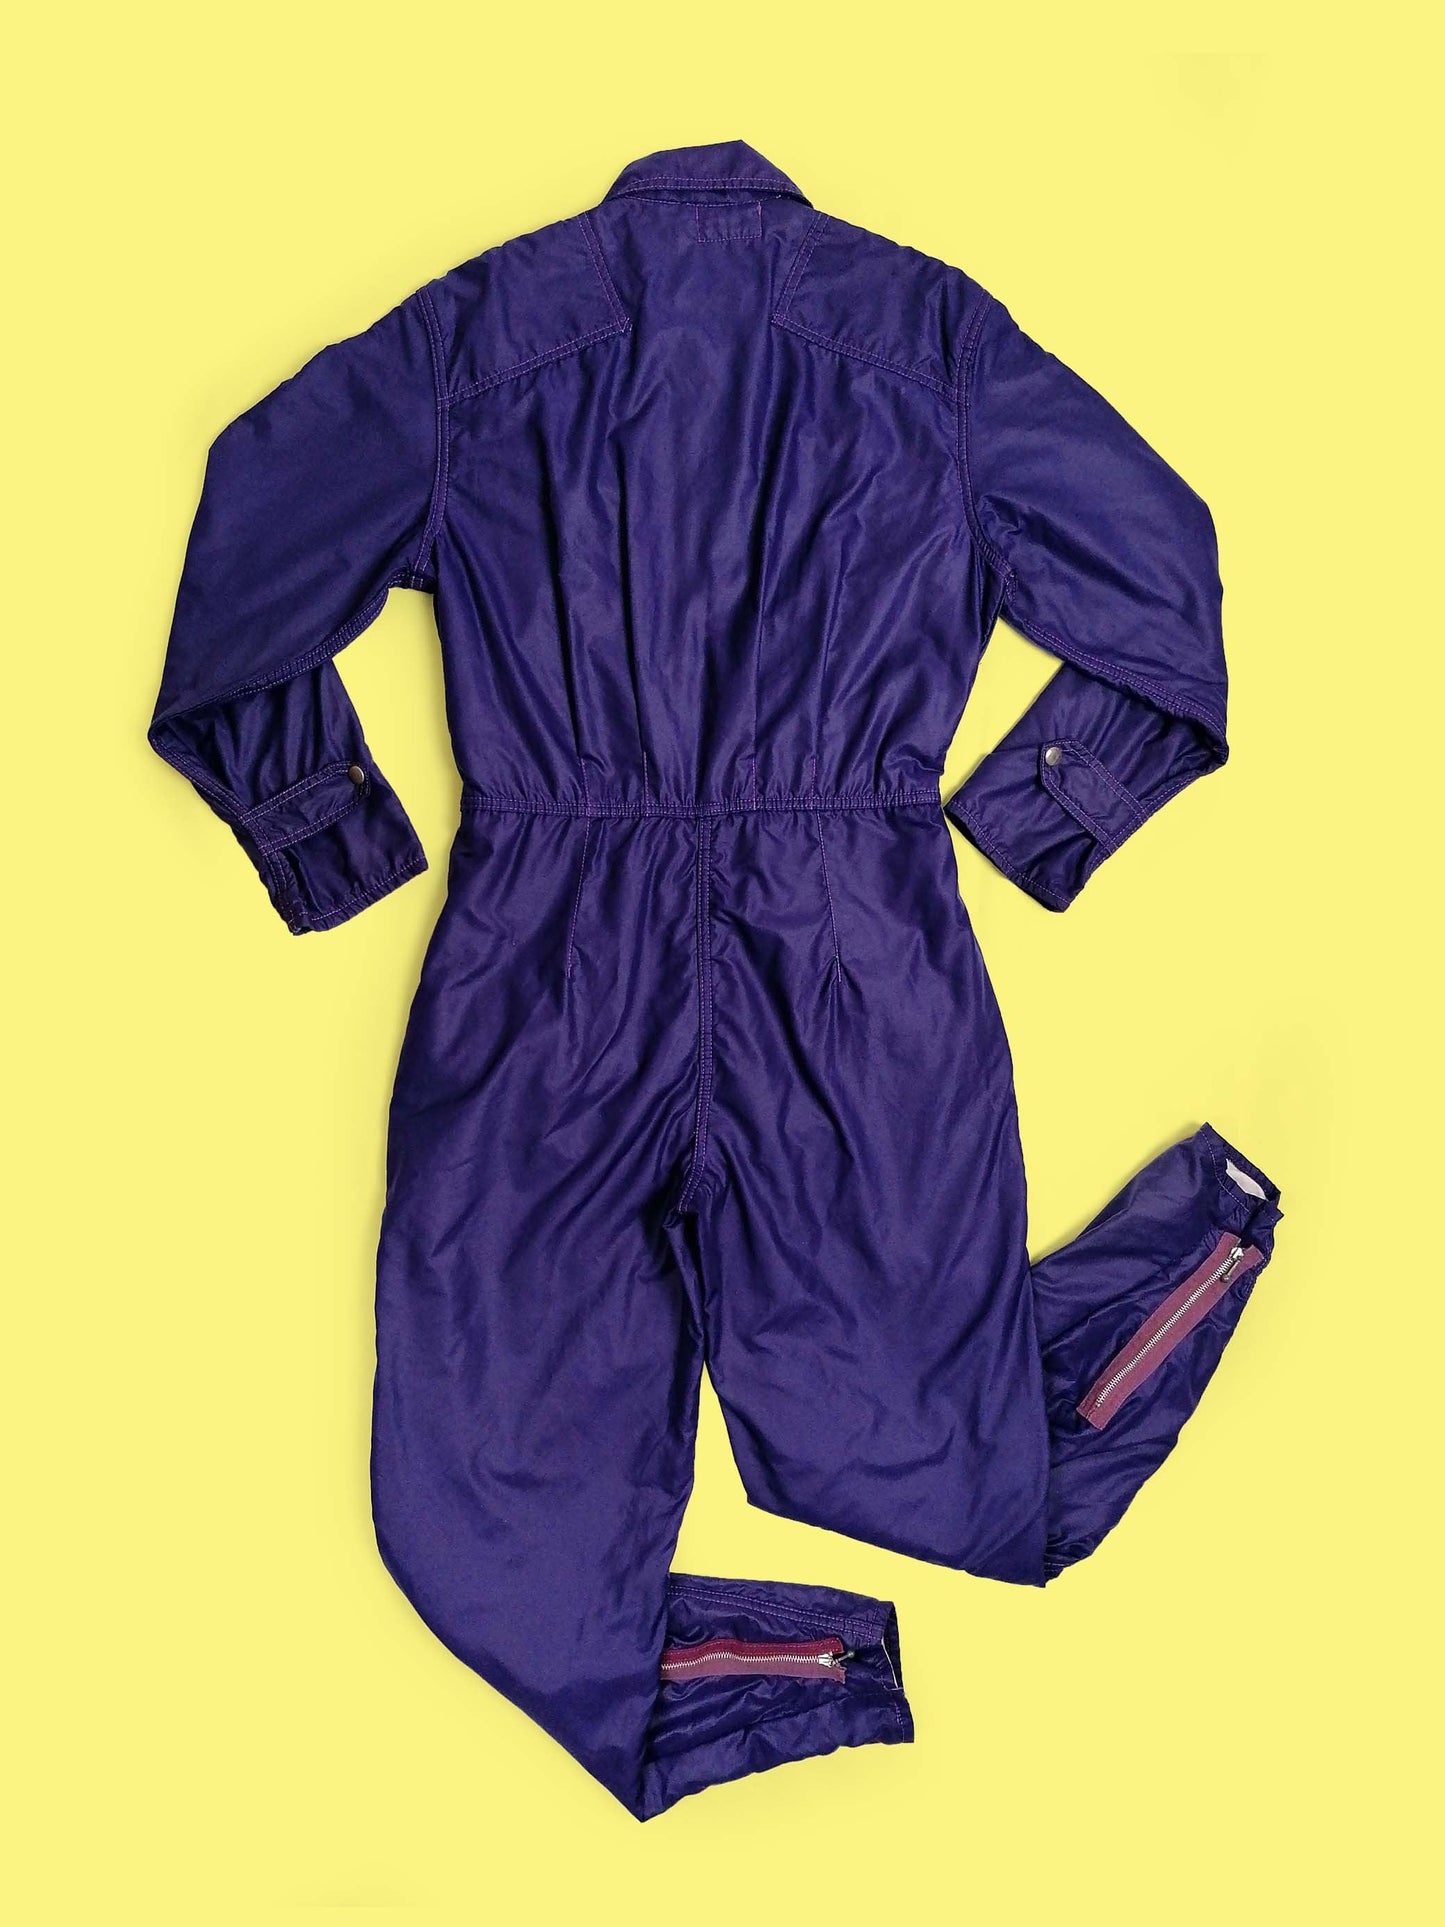 80's KING ONE Safteywear Made in France Jumpsuit - size S-M